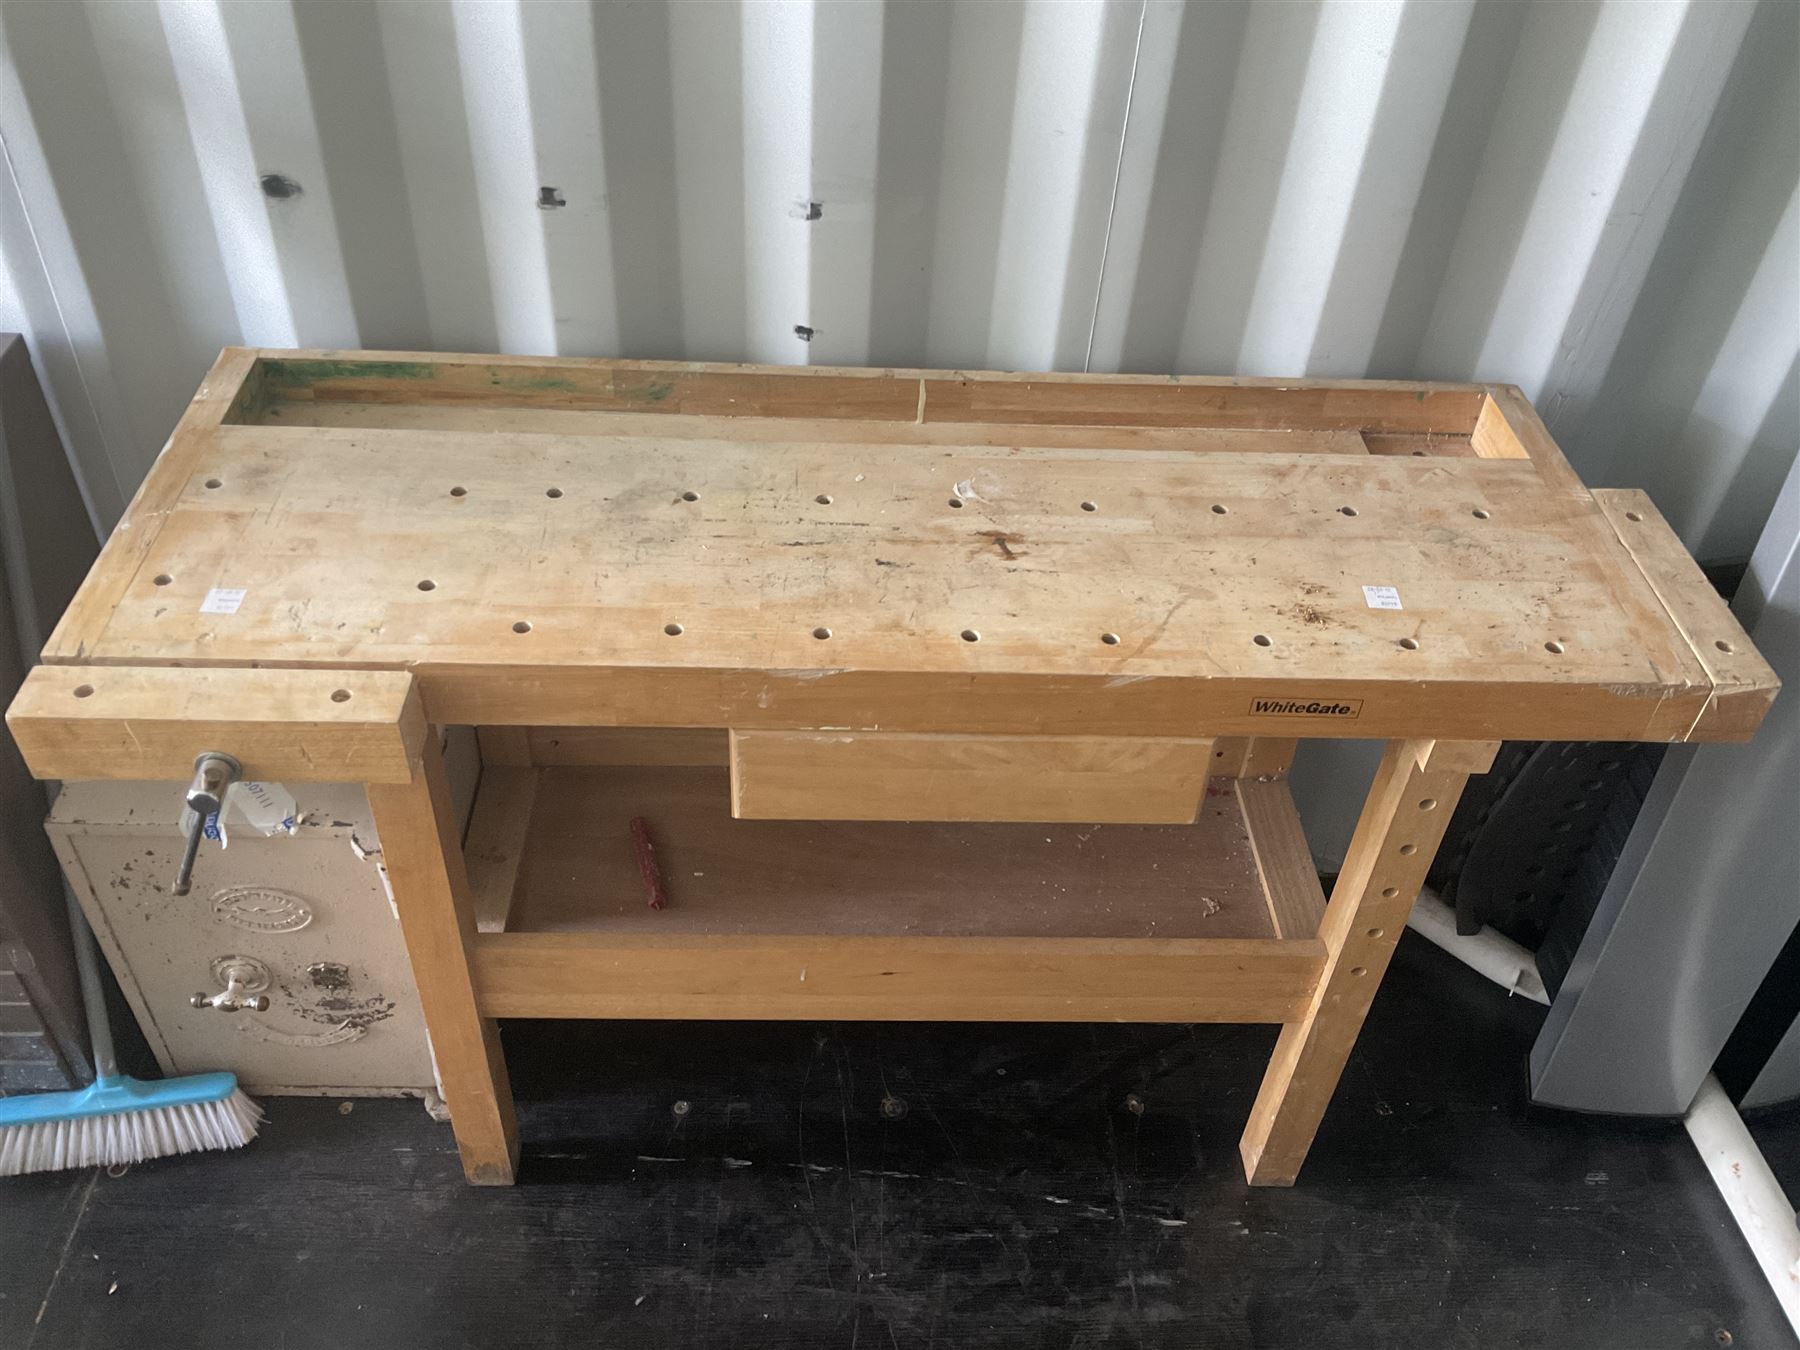 �White gate� Beech carpenters work bench with vice - THIS LOT IS TO BE COLLECTED BY APPOINTMENT FROM